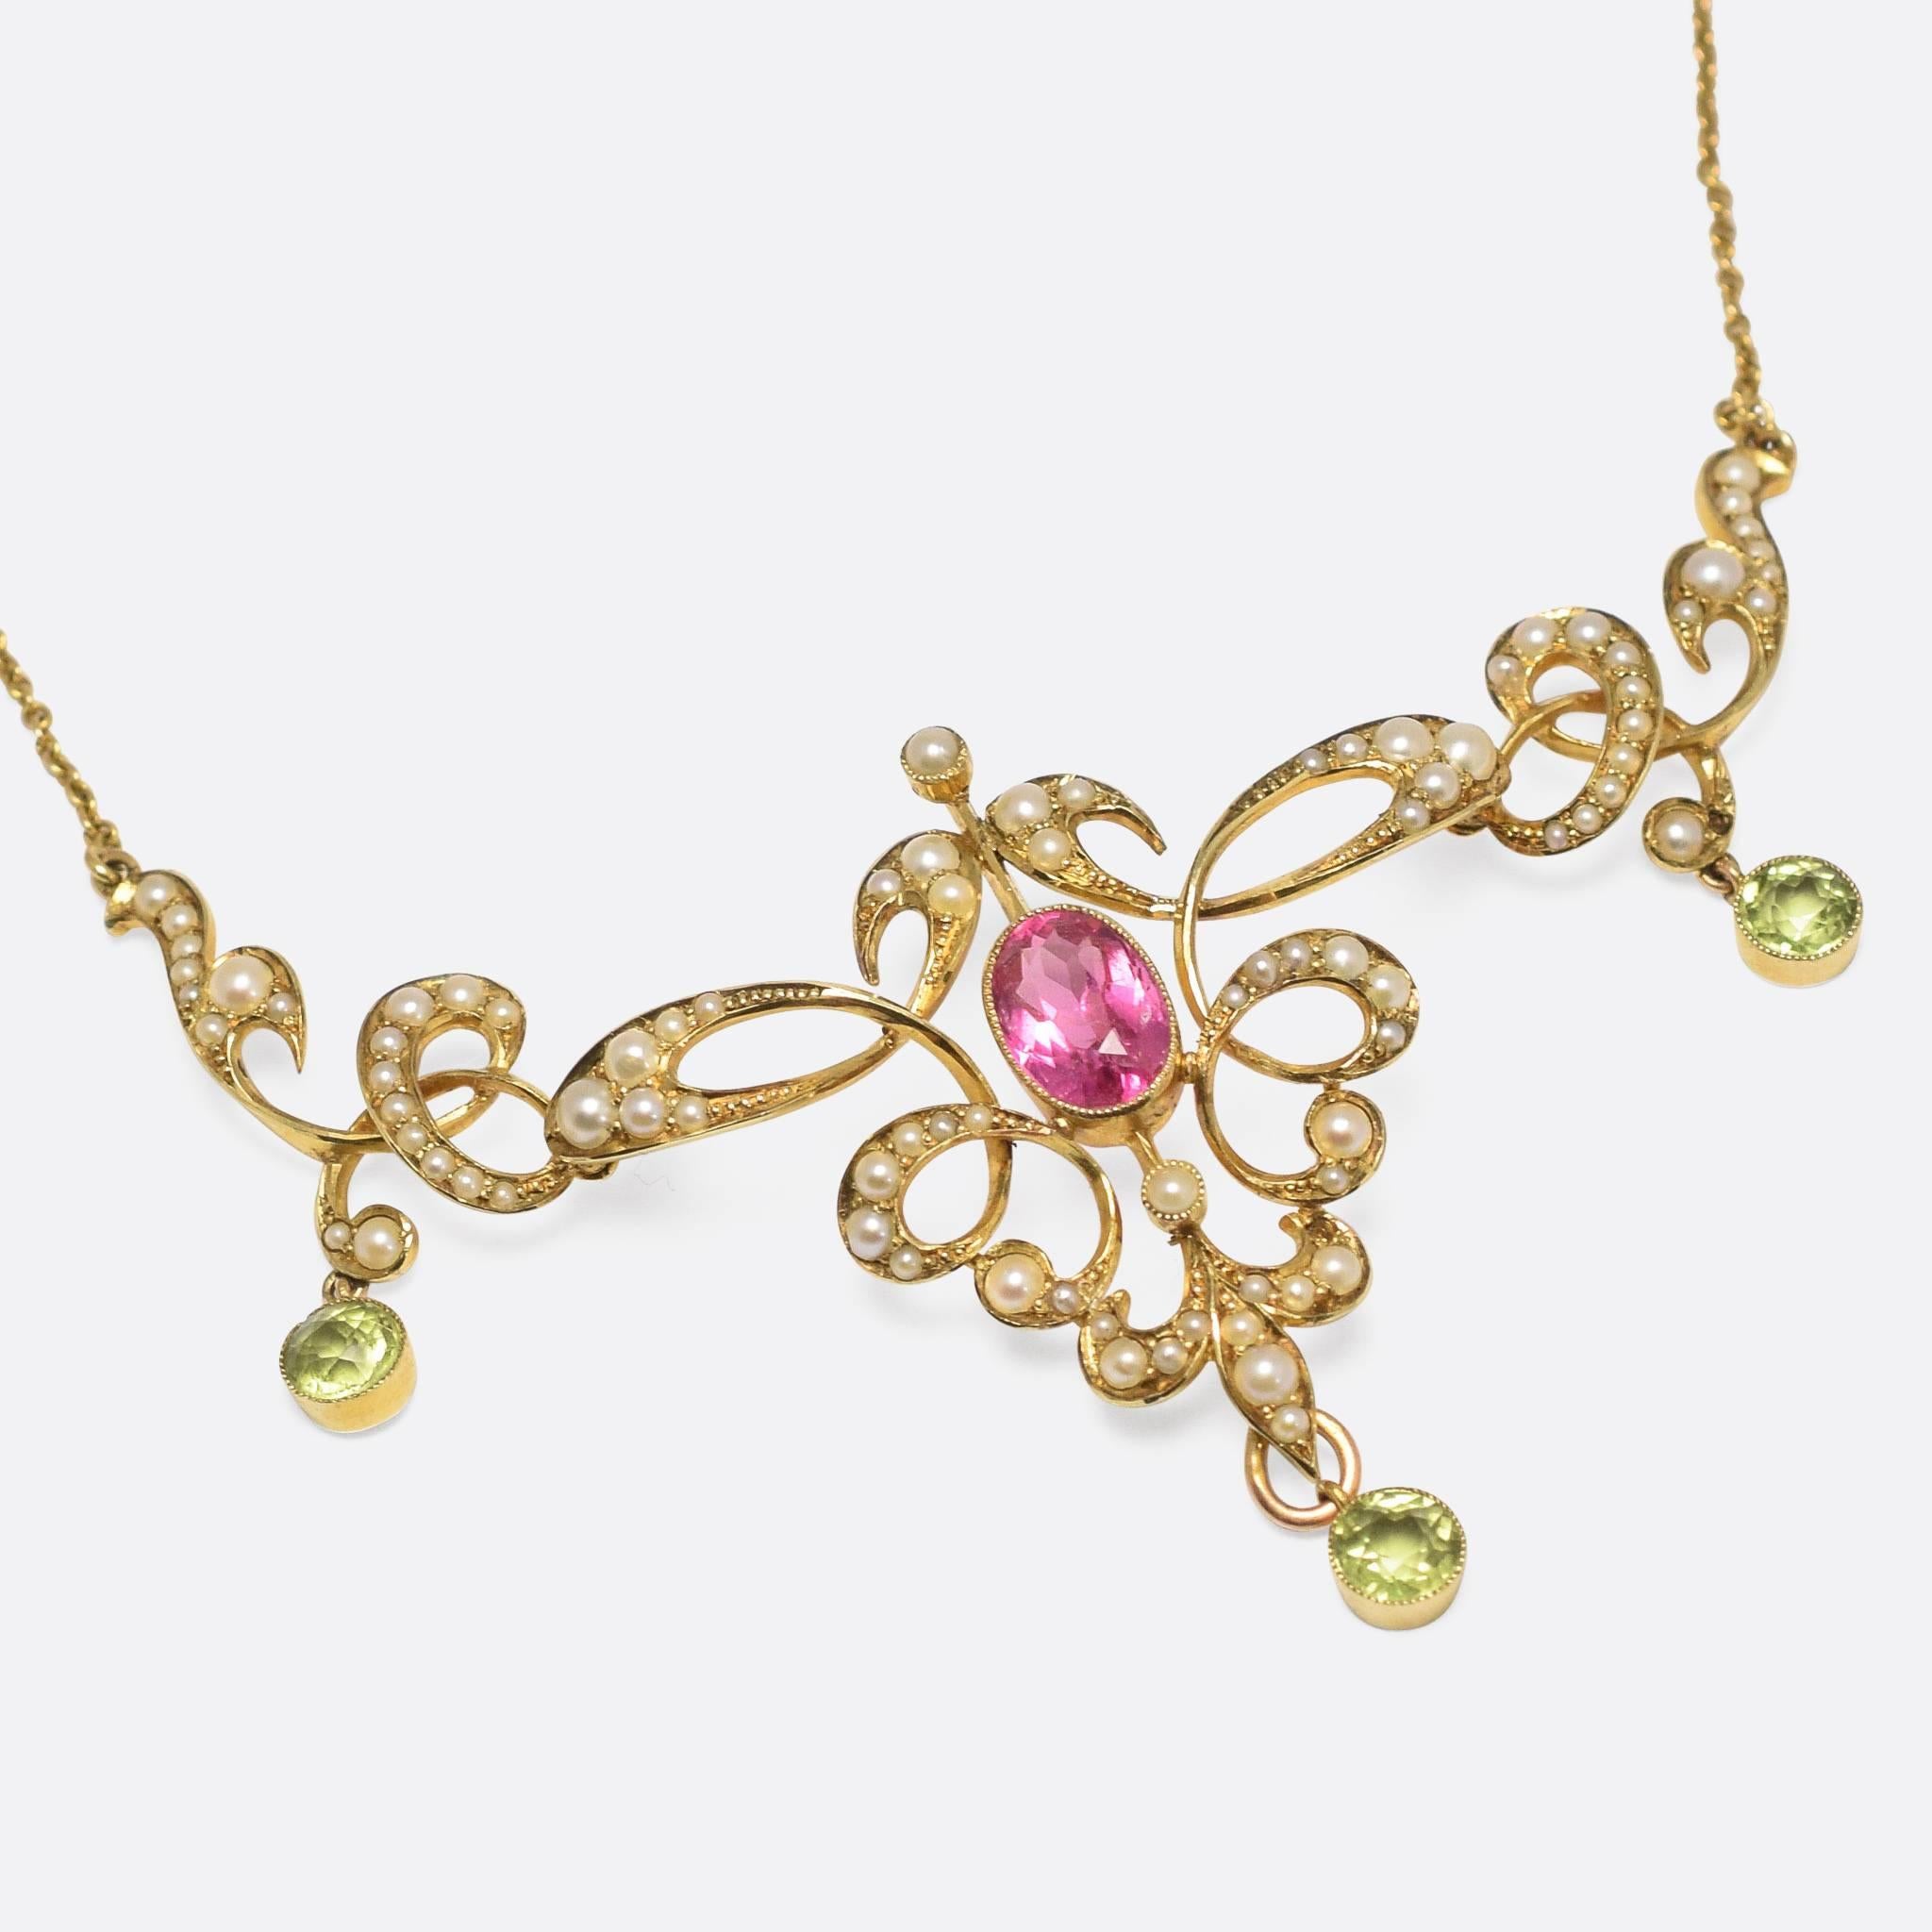 An impressive Edwardian era lavaliere pendant, set with peridot, pearls and a vibrant pink topaz centrepiece. The sides are articulated, moving freely beside the central body, and the piece features beautiful flowing foliate curves. Modelled in 15k